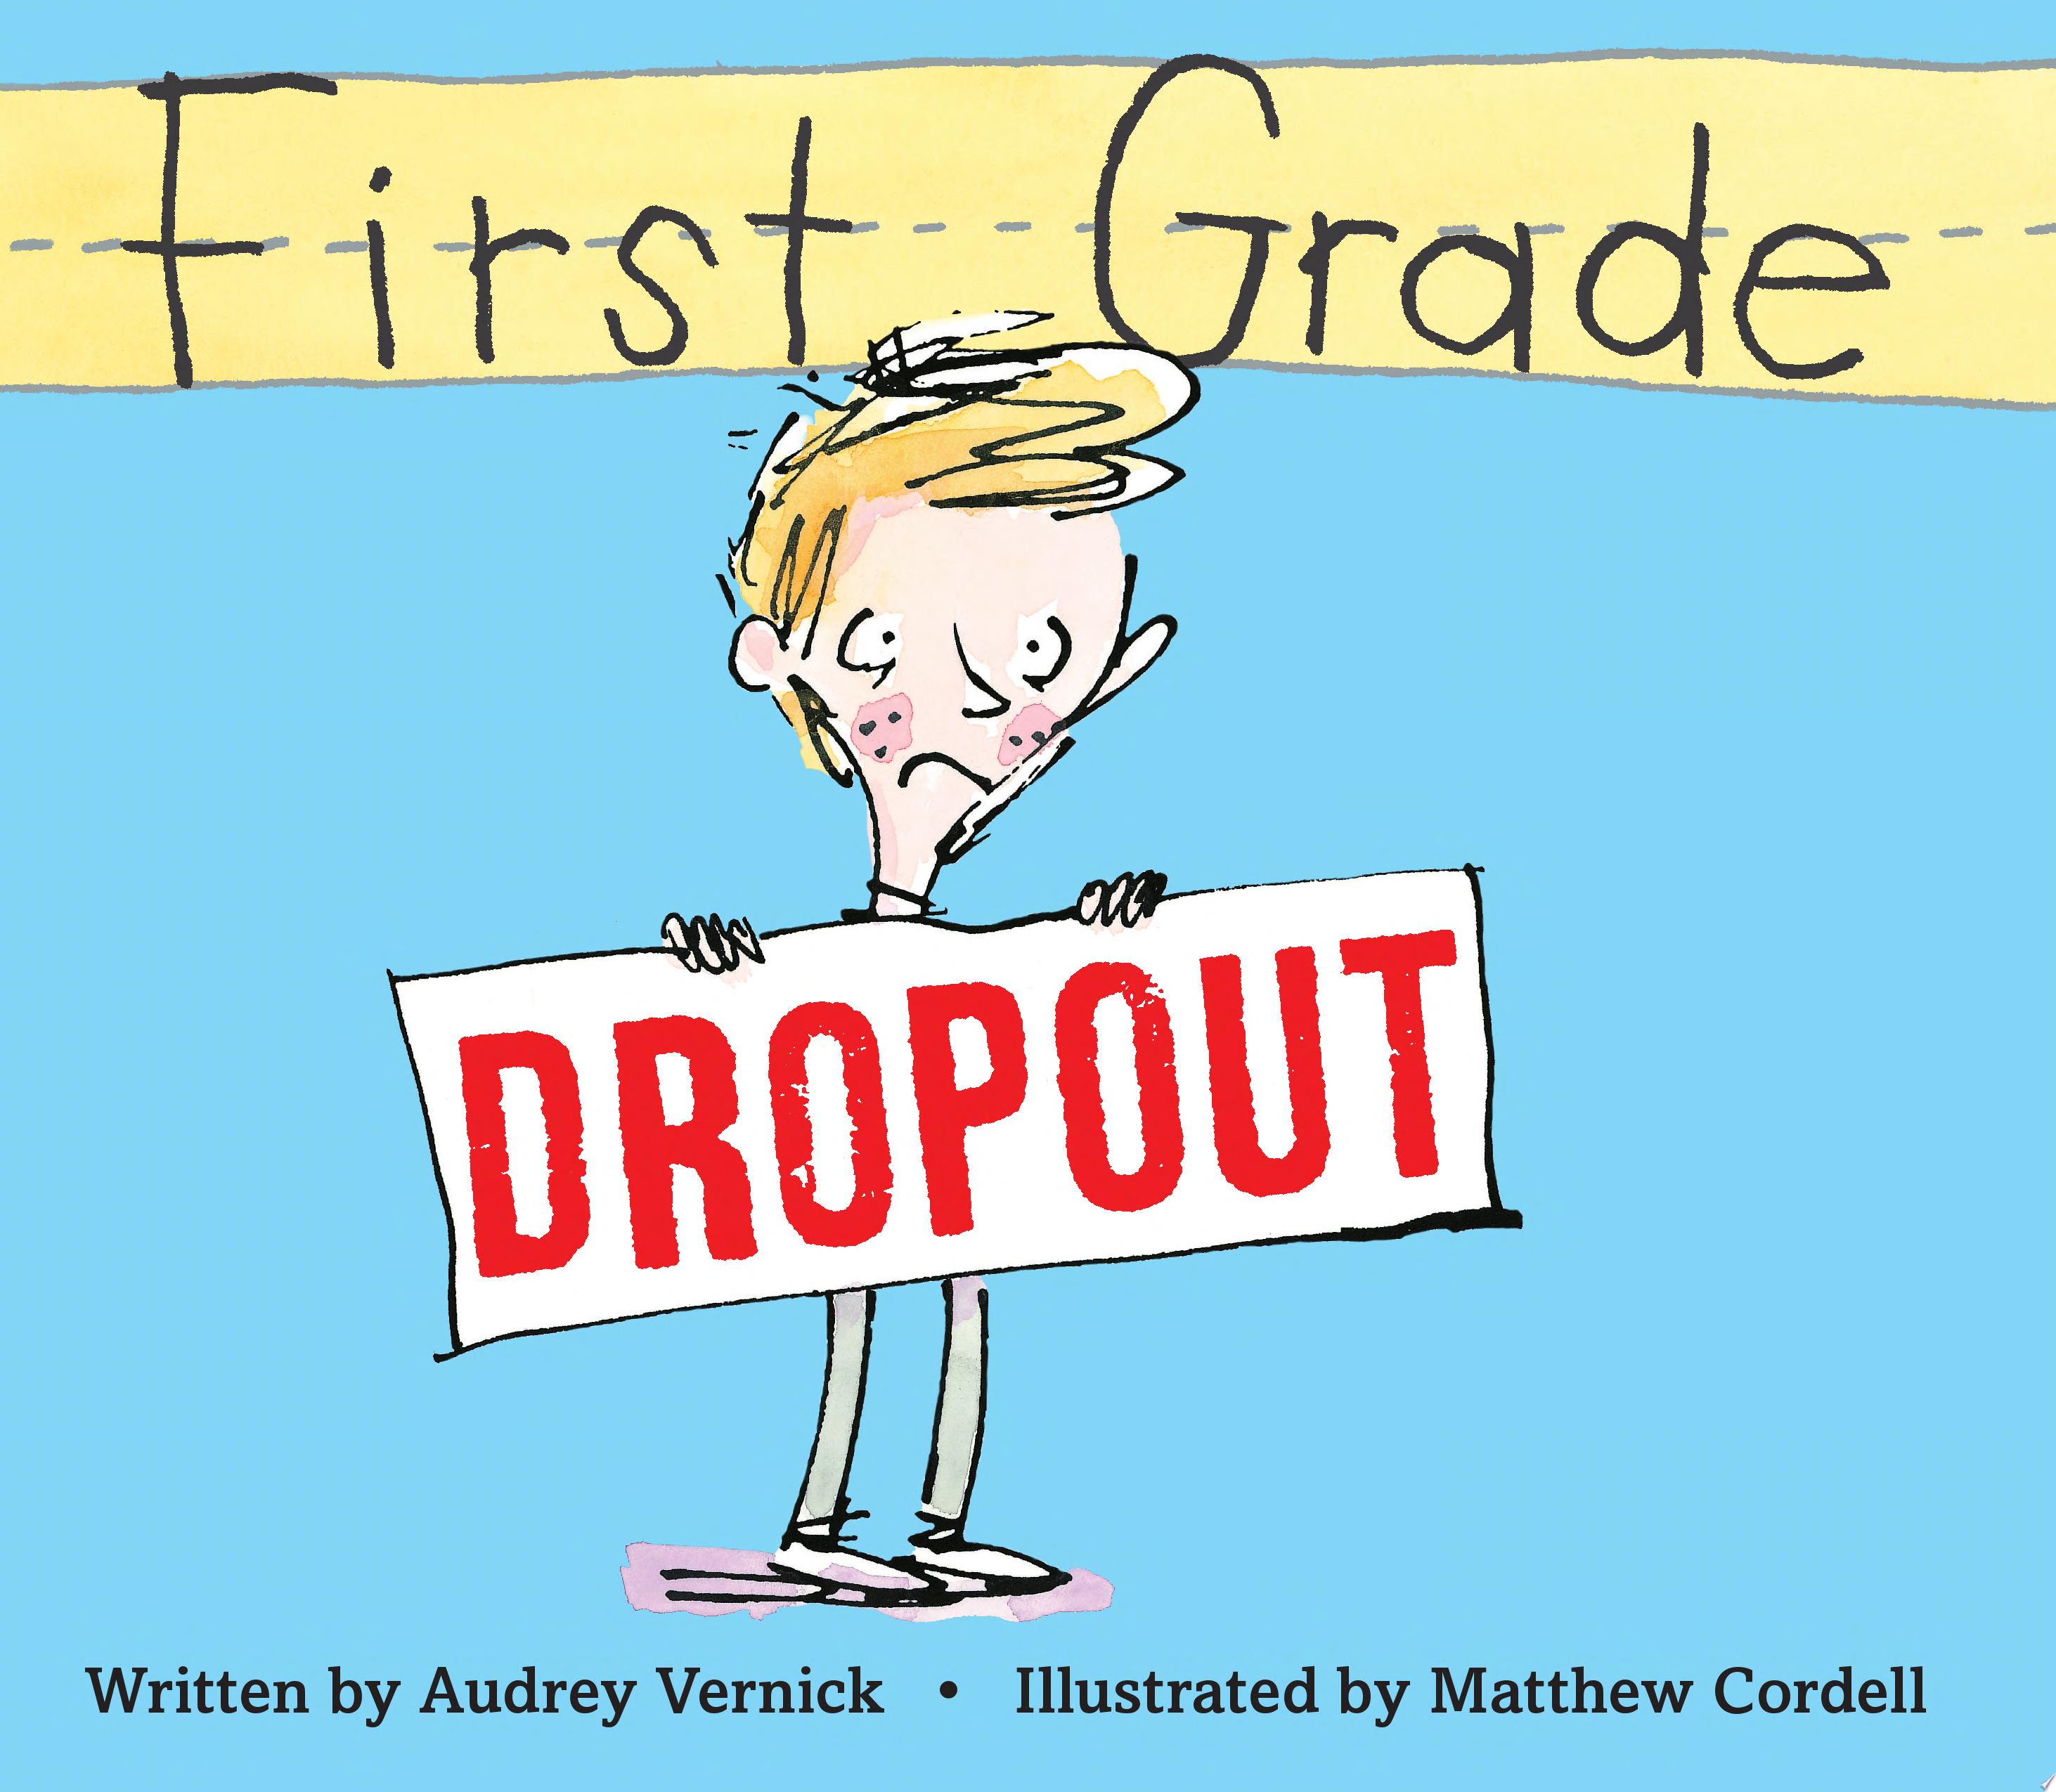 Image for "First Grade Dropout"